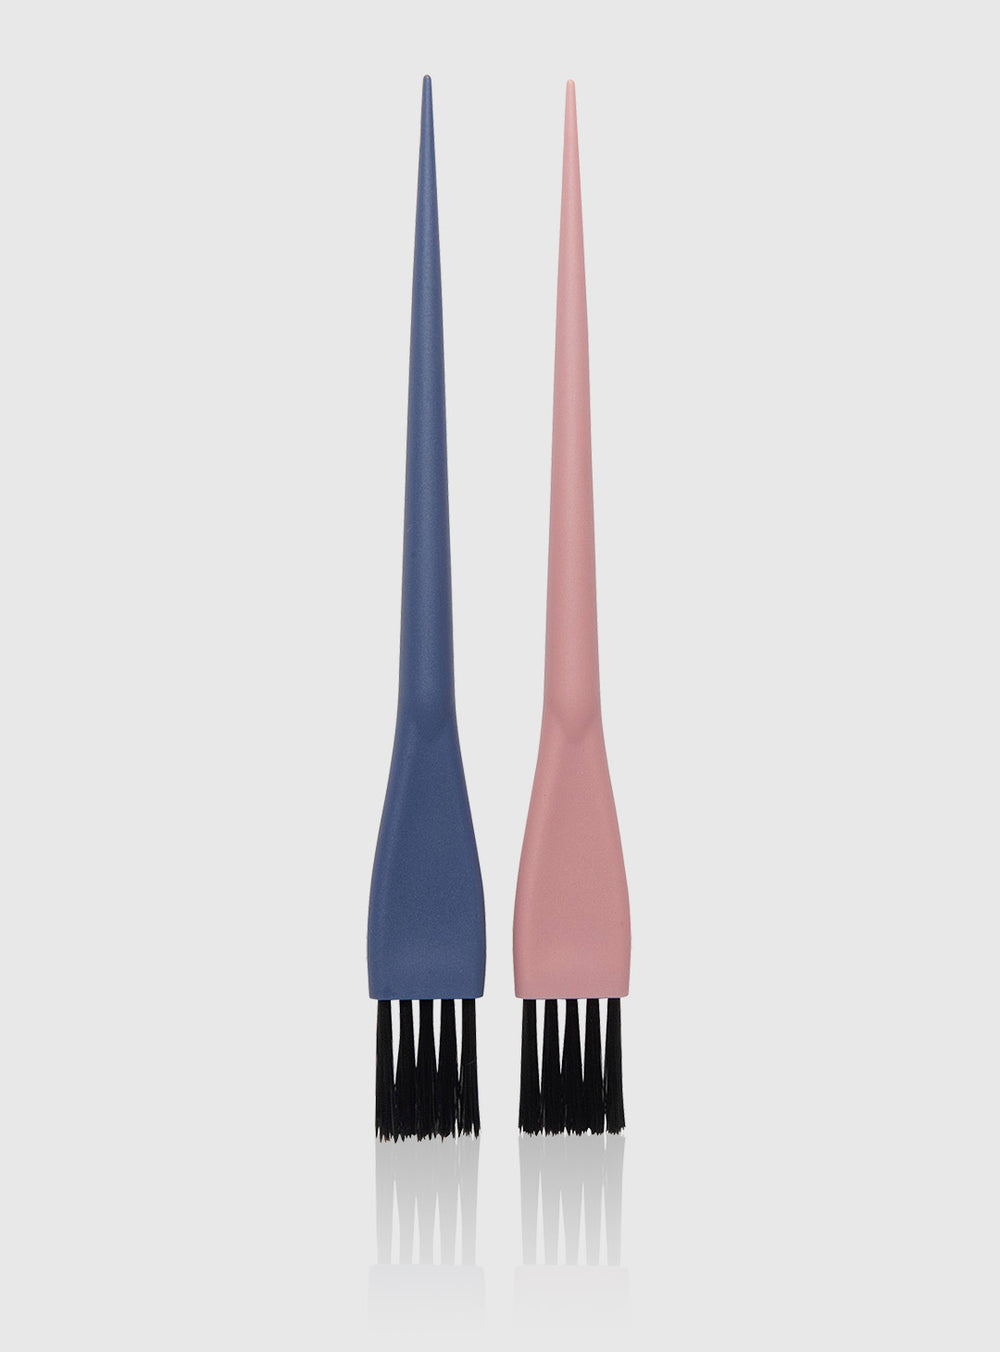 Fromm 7/8" Soft Color Brush - 2 Pack